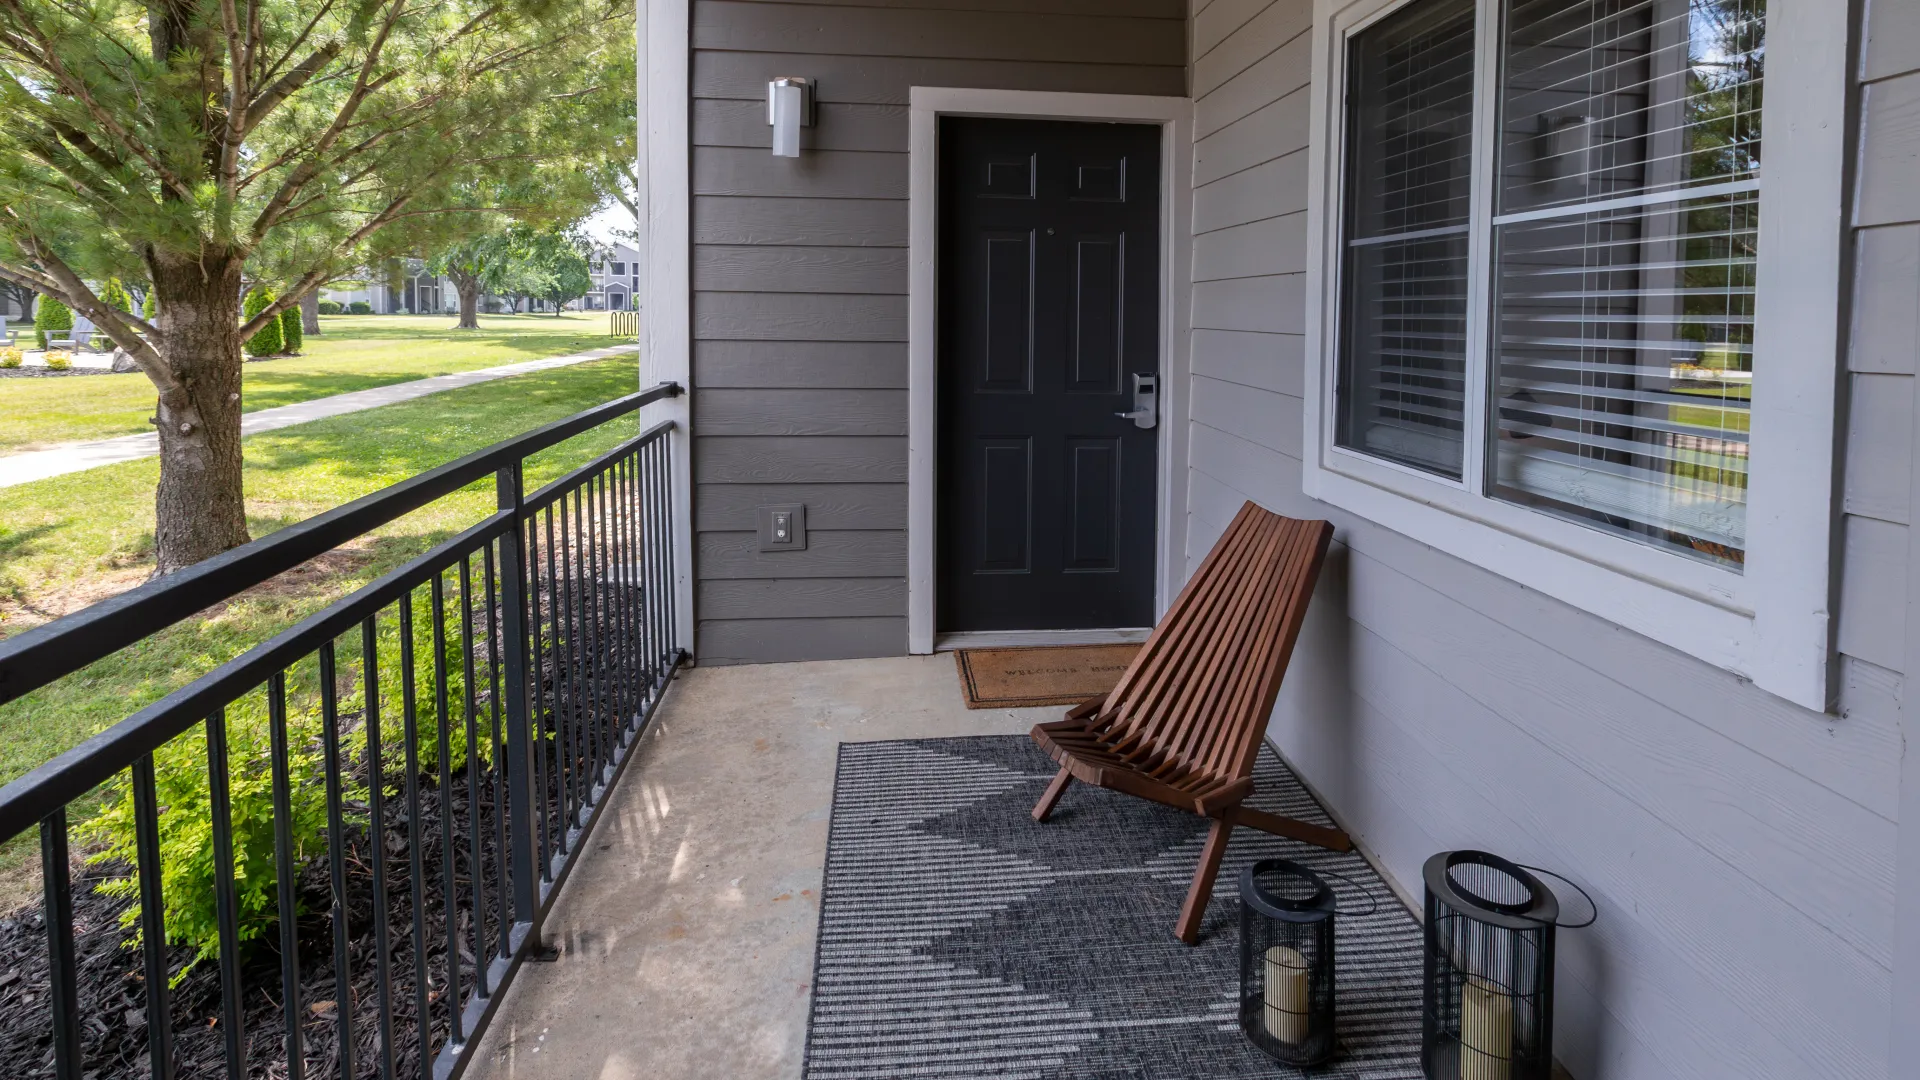 Private patio featuring a comfortable chair, decorative lanterns, and views of the lush green surroundings. Ideal for relaxation and enjoying the outdoors.